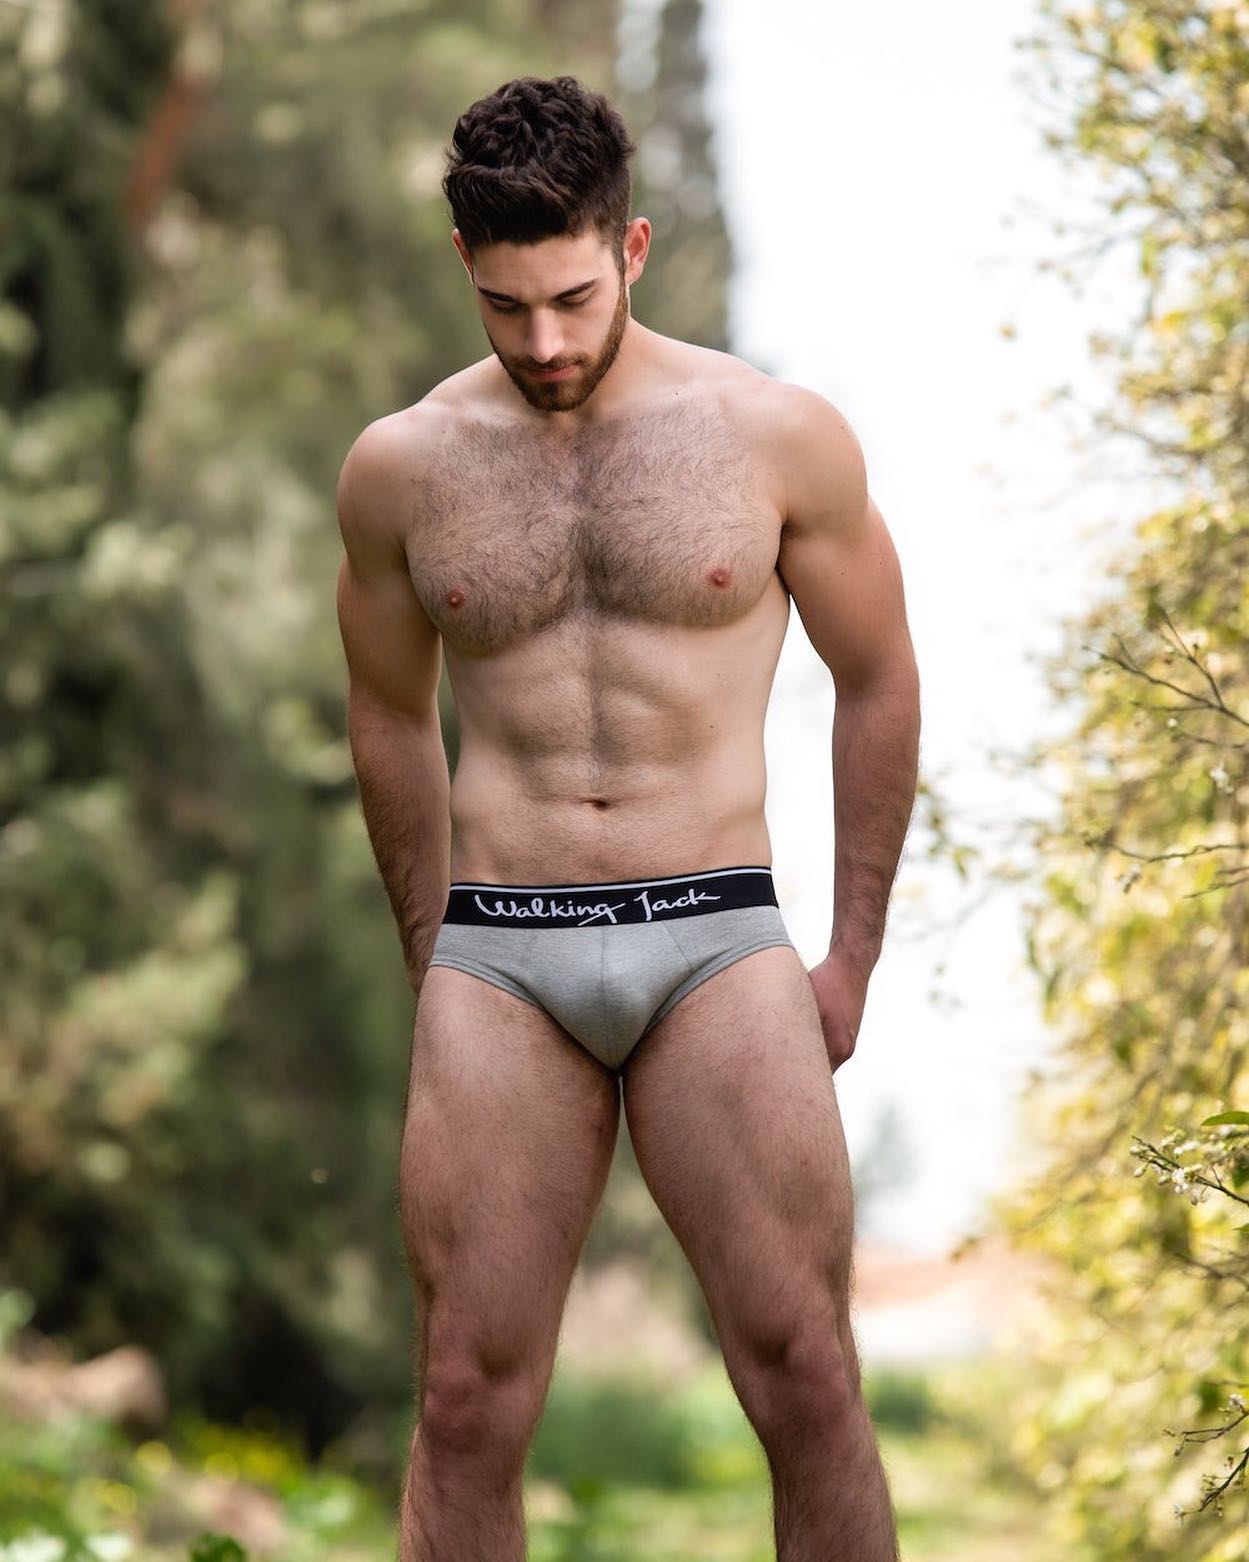 Top quality fabrics and impeccable manufacturing meet contemporary styling and great comfort in the Walking Jack Ash briefs. Check them out:
____
https://menandunderwear.com/shop/underwear/walking-jack-ash-briefs